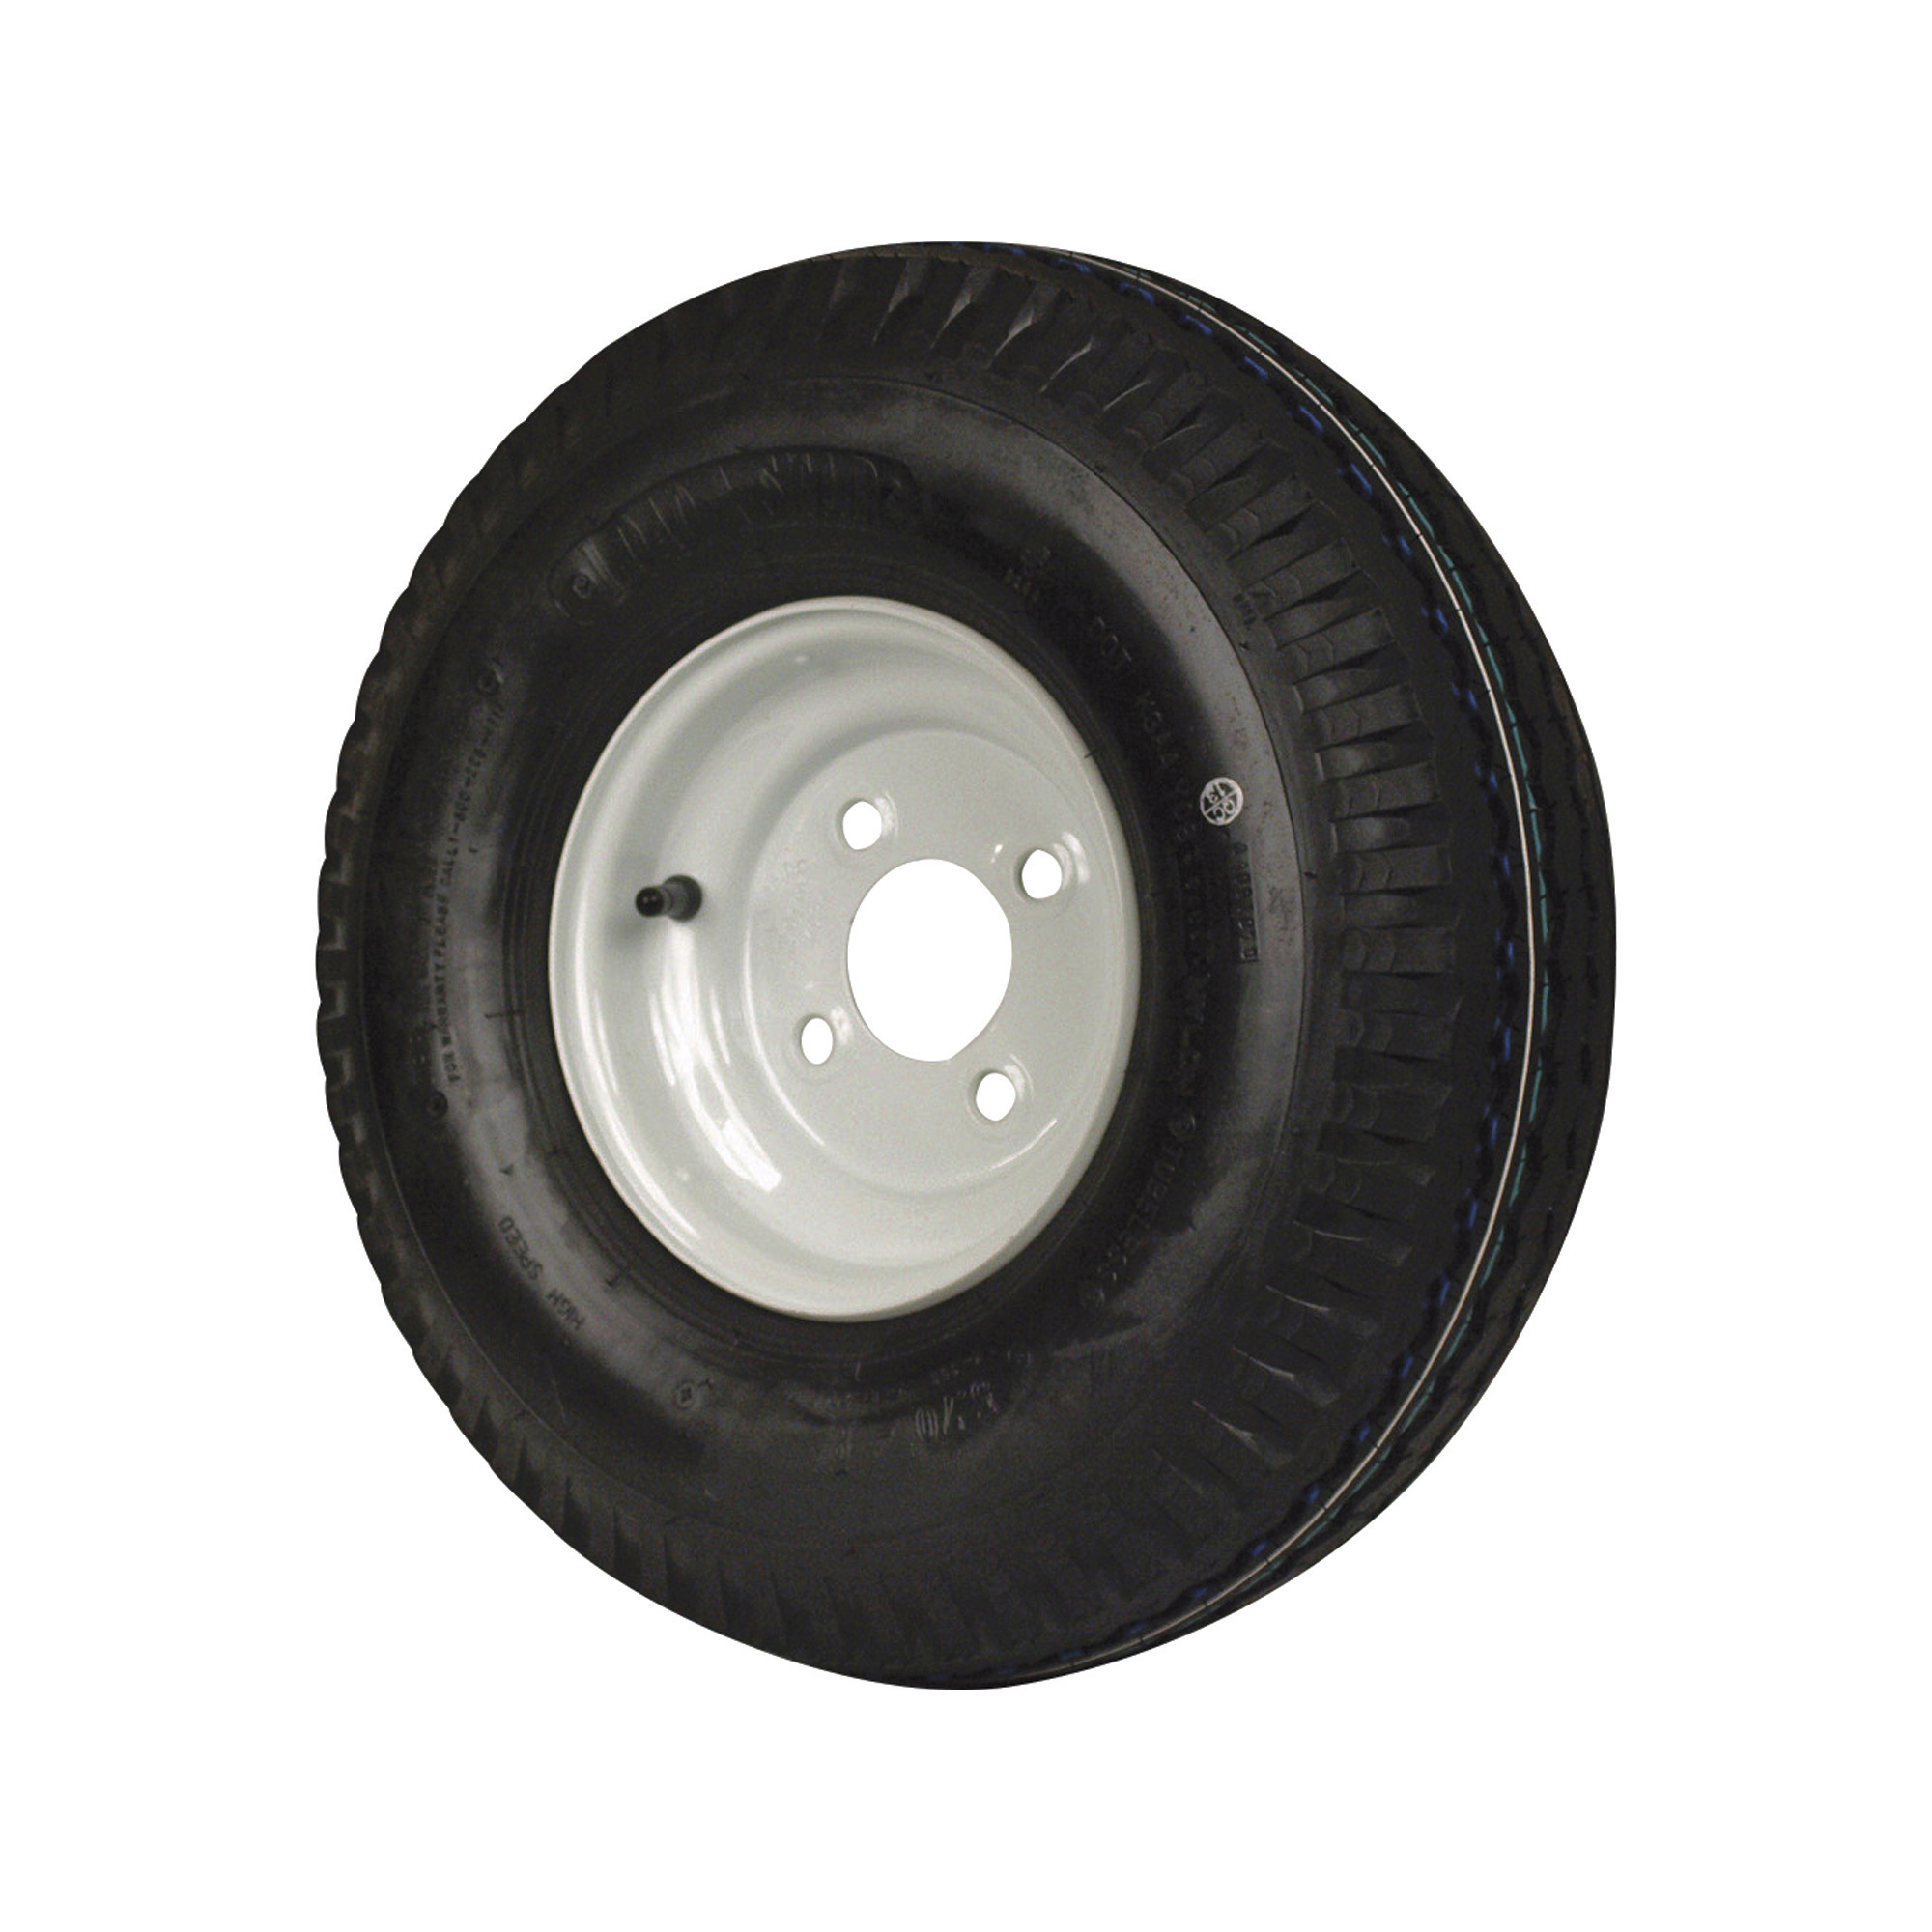 Kenda 8Inch Bias-Ply Trailer Tire and Wheel Assembly â 570 x 8, 4-Hole, Load Range B, Model DM508B-4IN